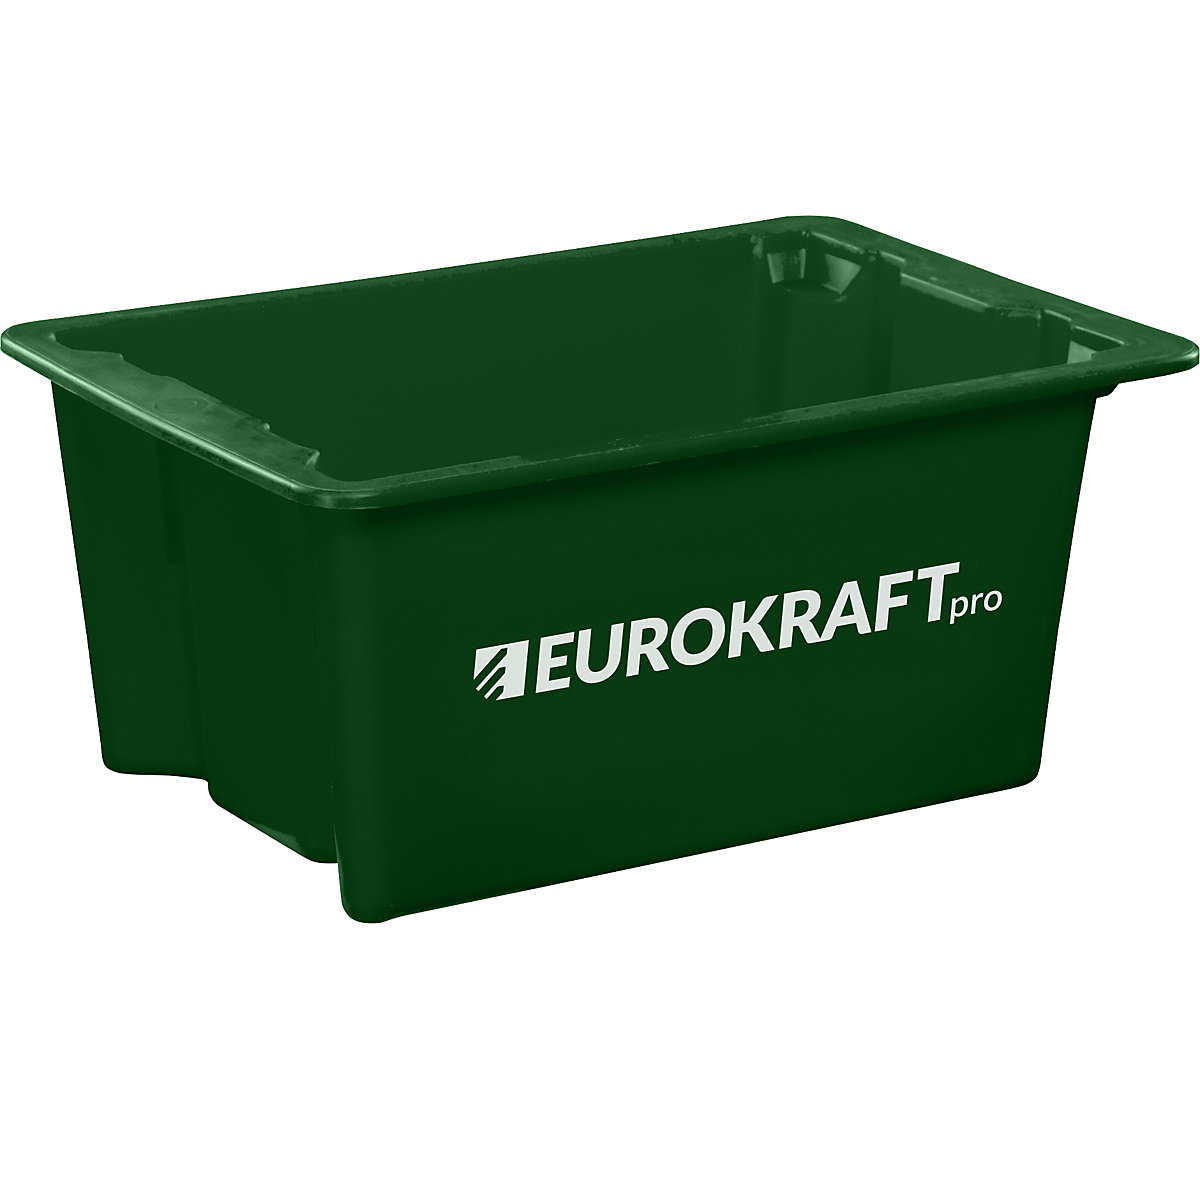 EUROKRAFTpro – Stack/nest container made of polypropylene suitable for foodstuffs, 6 l capacity, pack of 4, solid walls and base, green